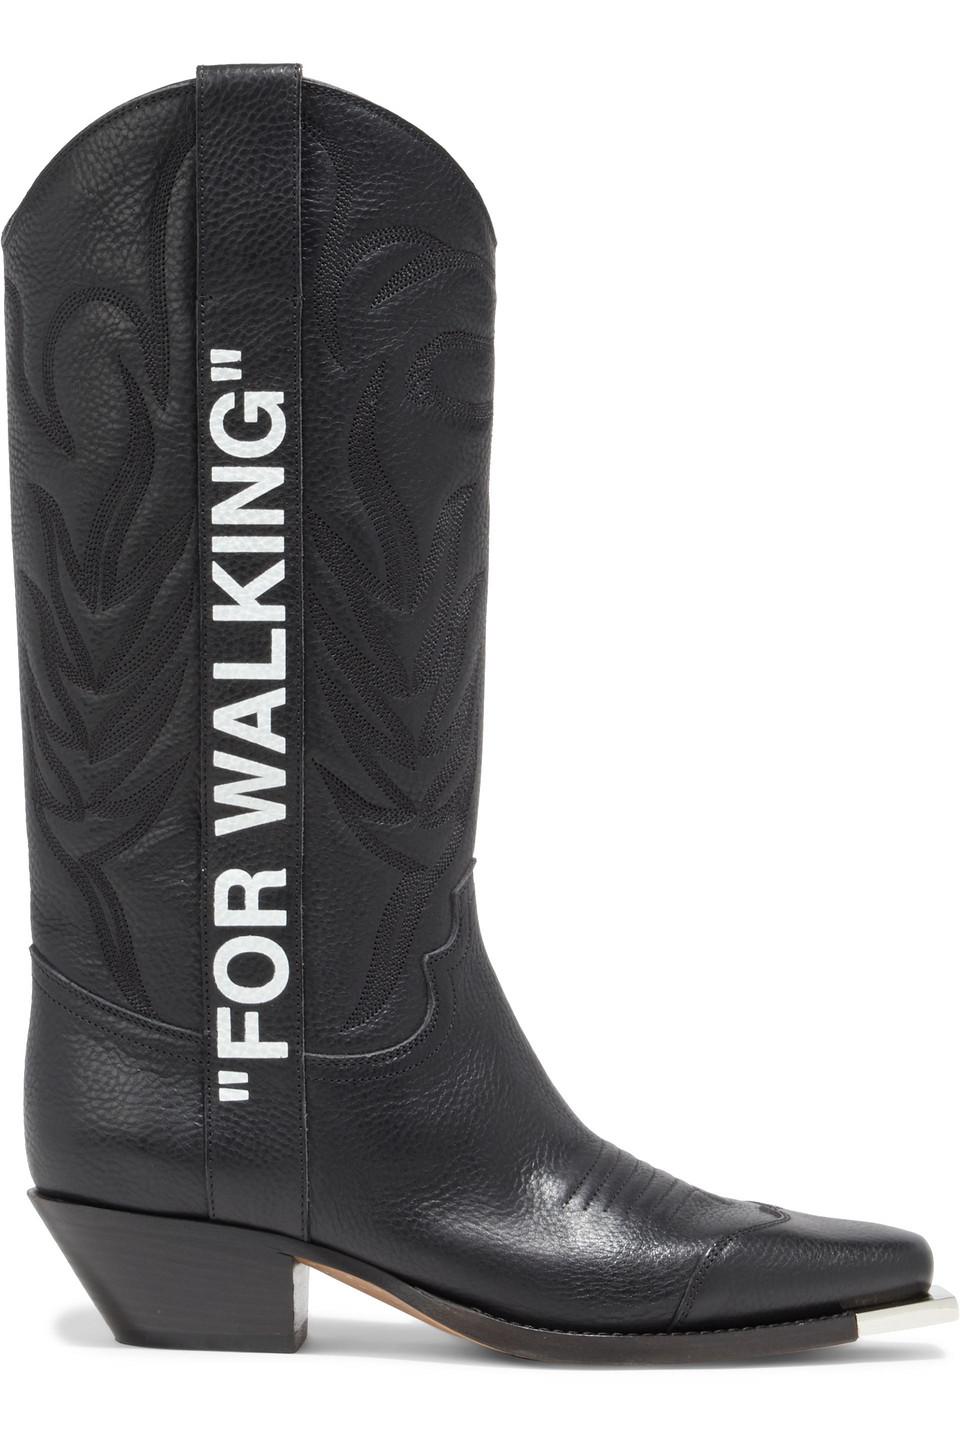 Off-White c/o Virgil Abloh For Walking Printed Pebbled-leather Boots in  Black | Lyst